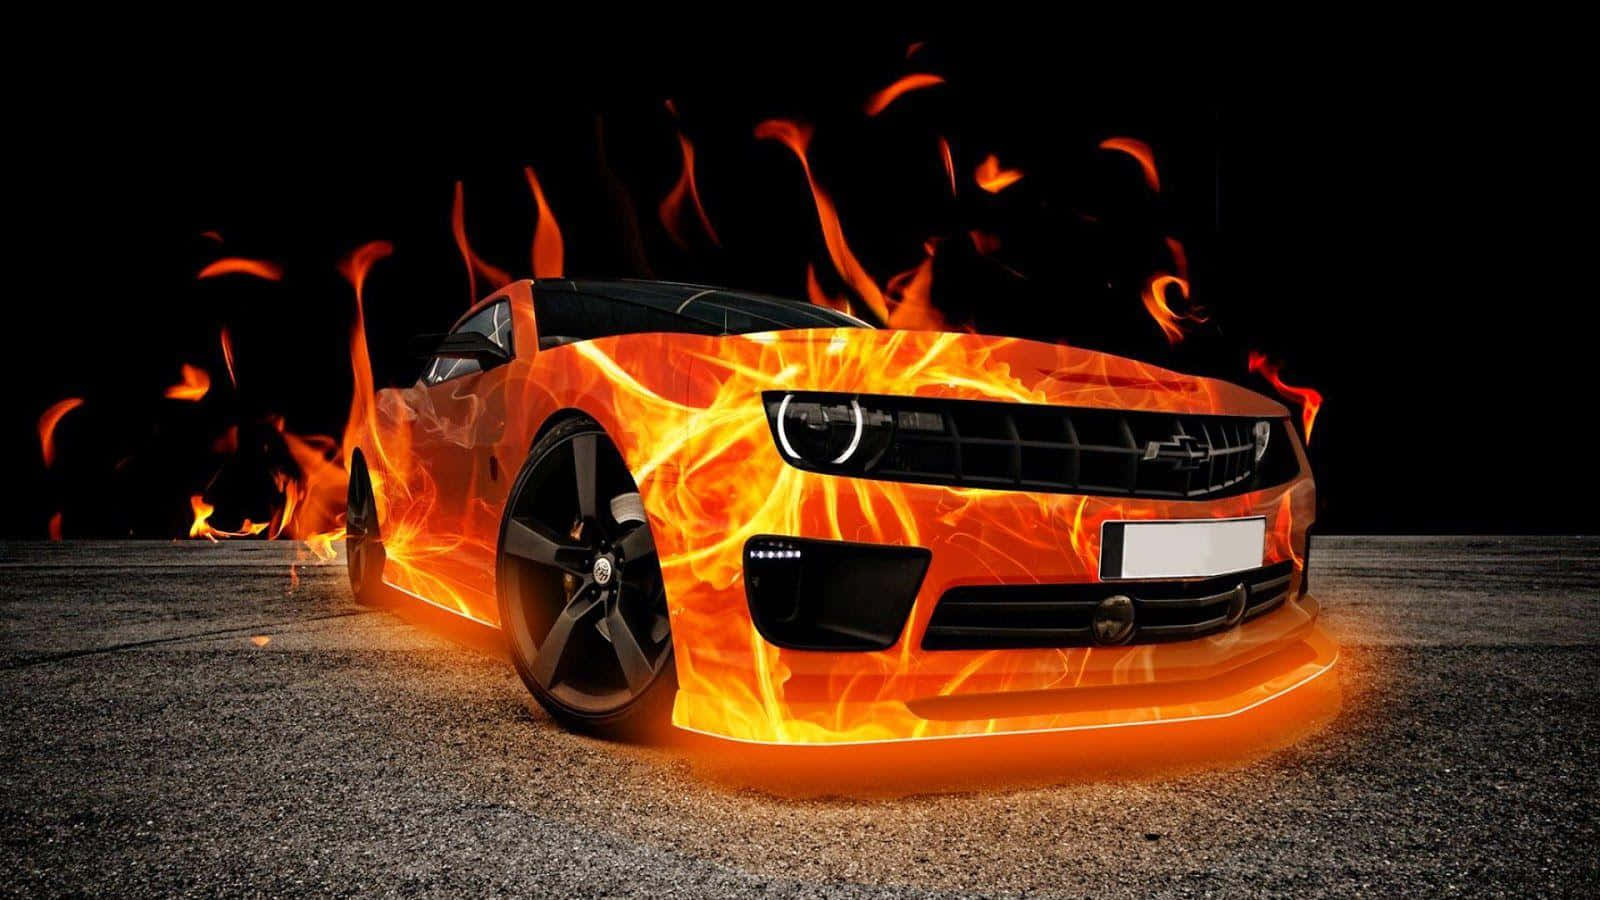 A Car With Flames On It In The Dark Background